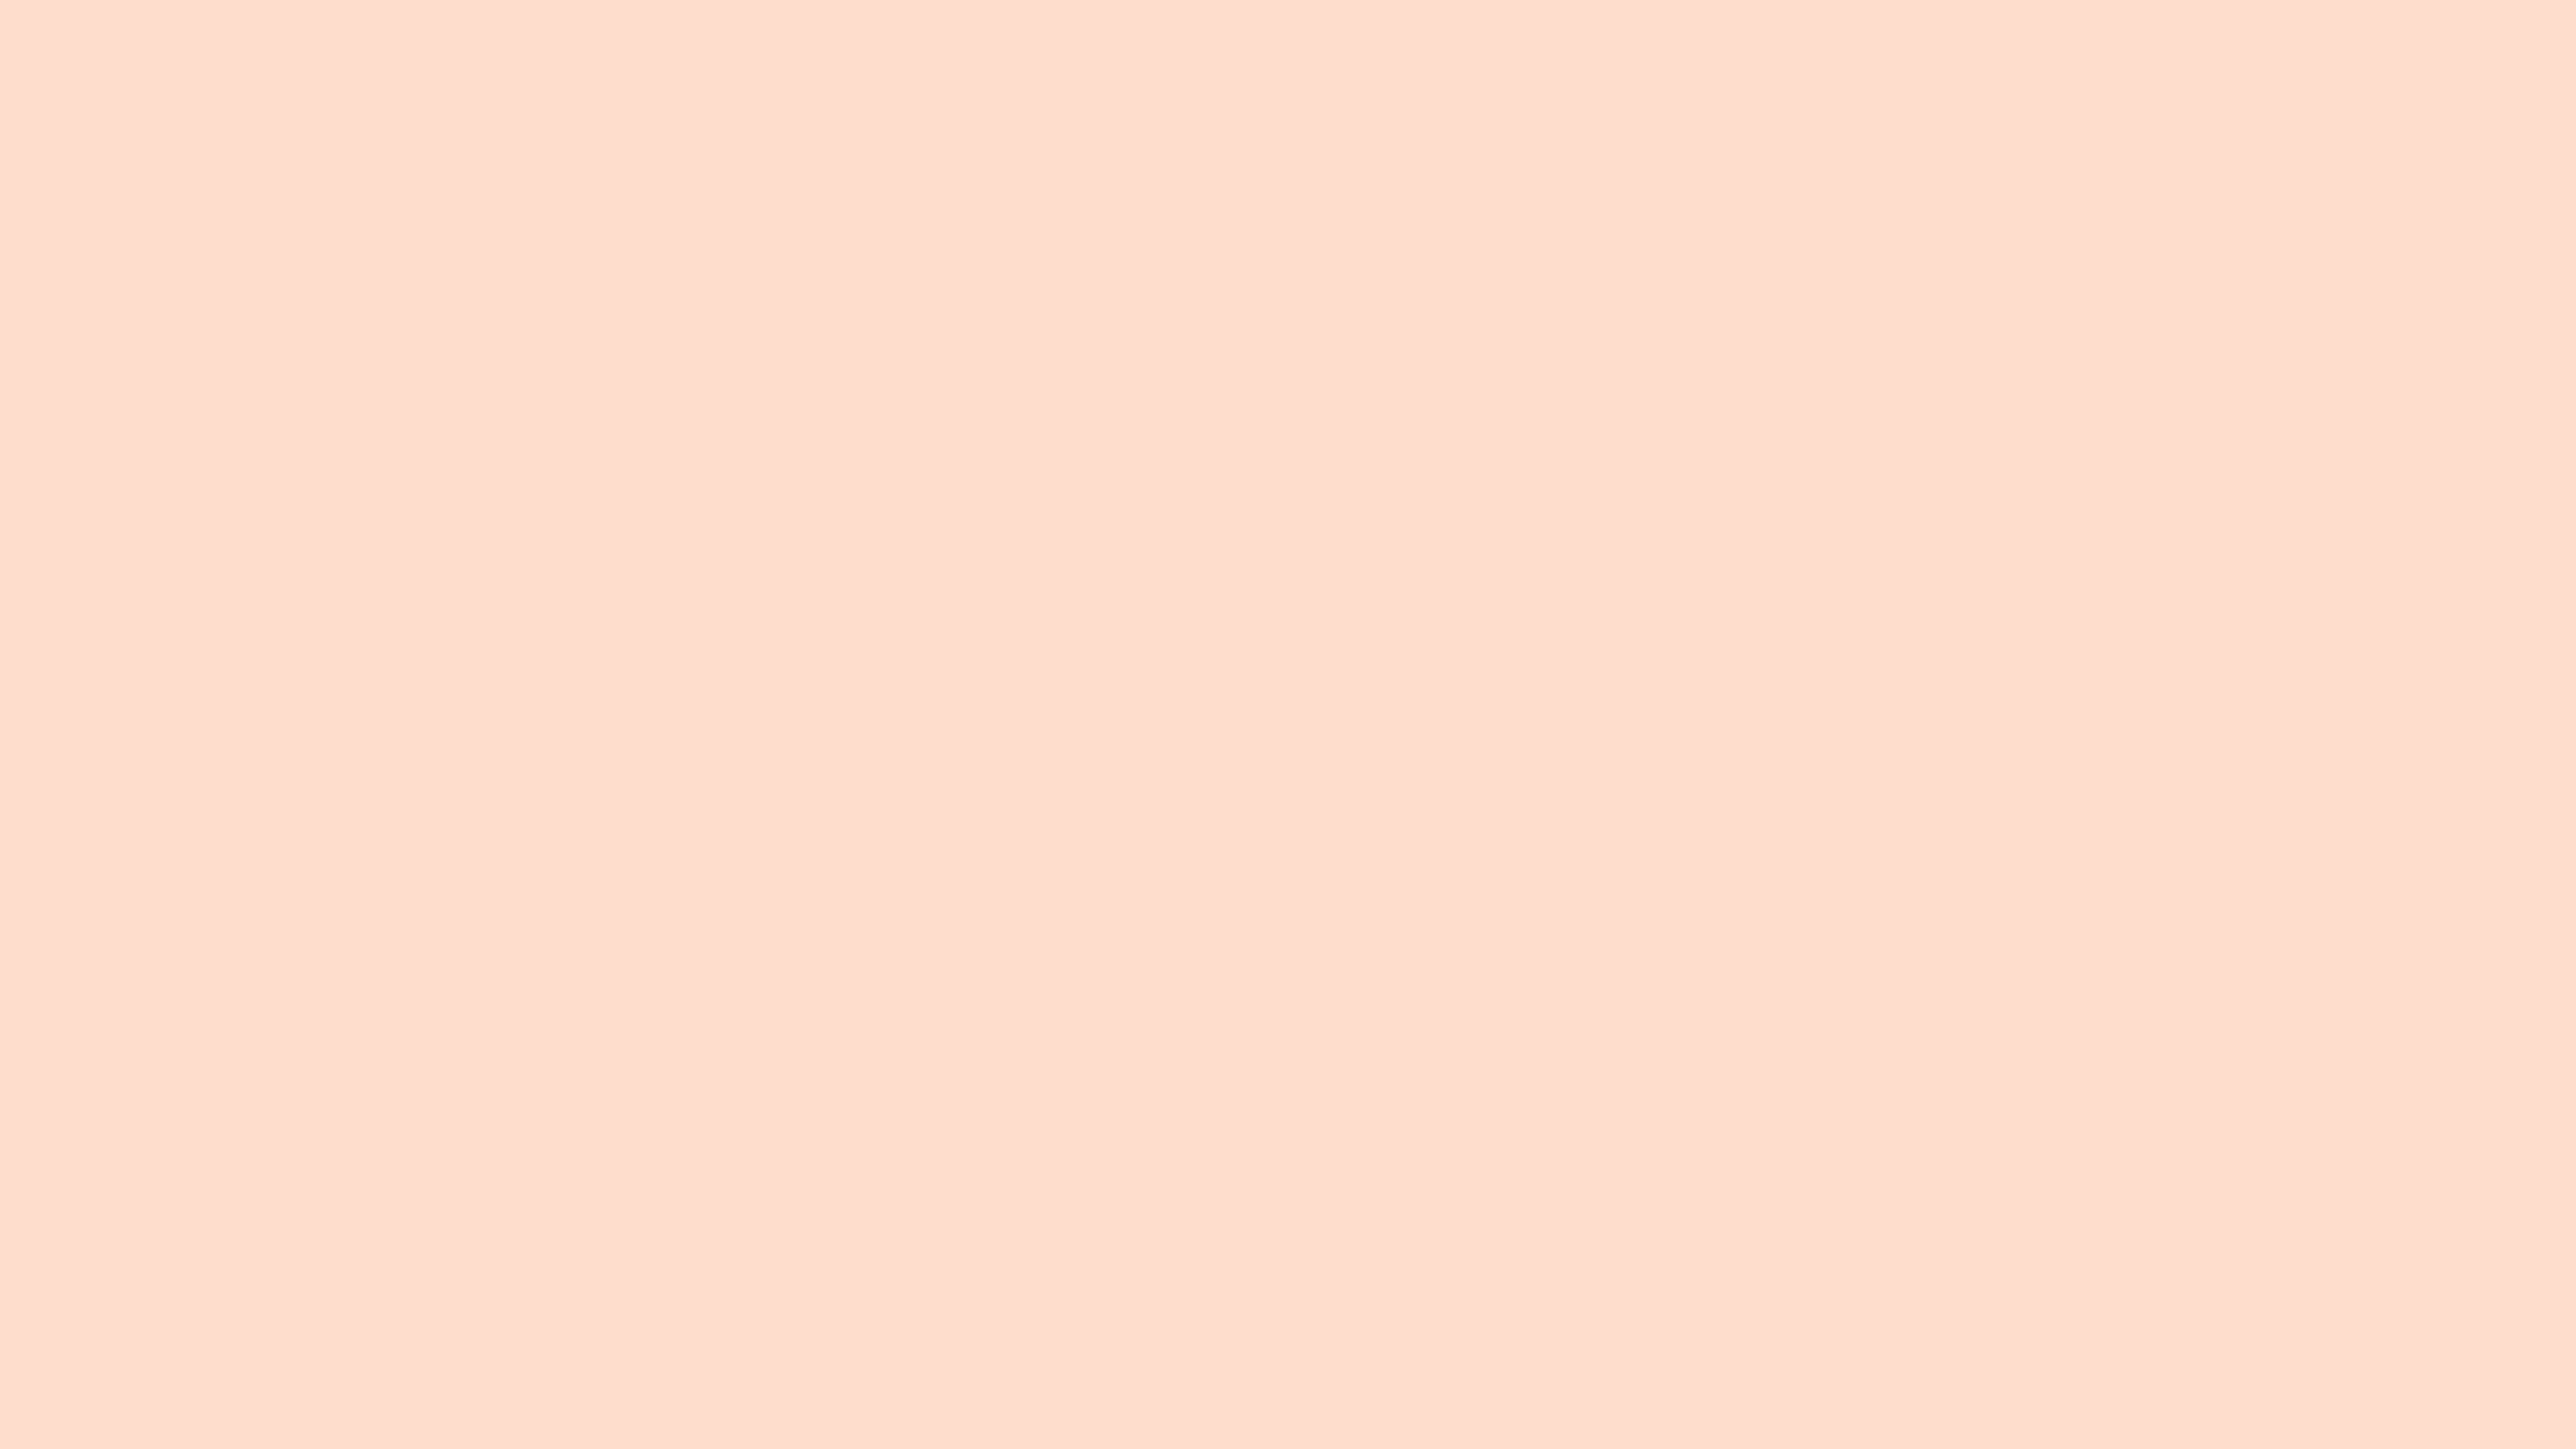 Peaceful Peach Solid Color Background Image | Free Image Generator